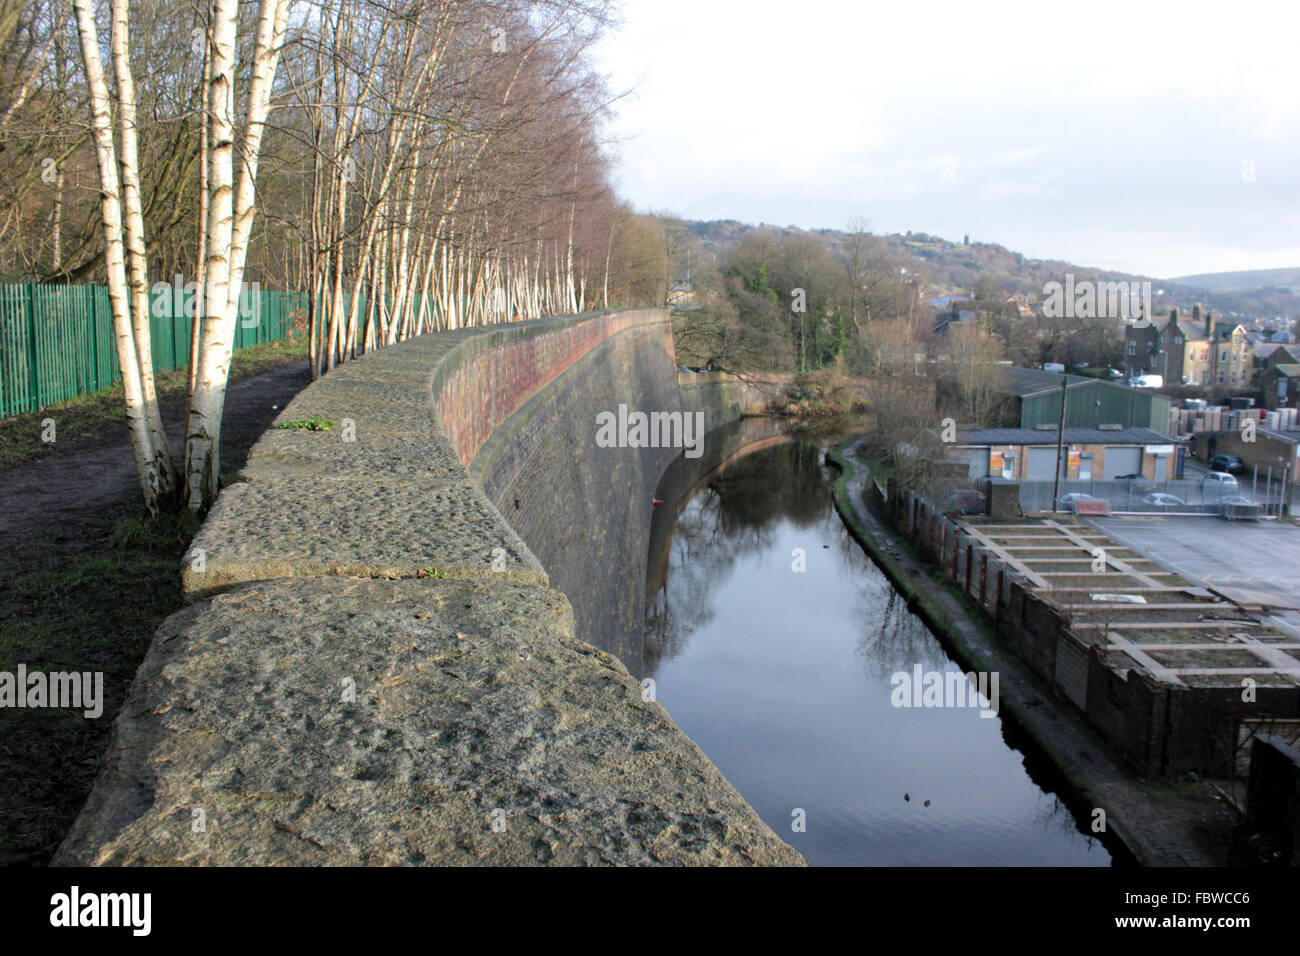 The Great Wall of Todmorden.  The massive brick wall towering alongside the Rochdale canal on the Lancashire and Yorkshire border. Stock Photo